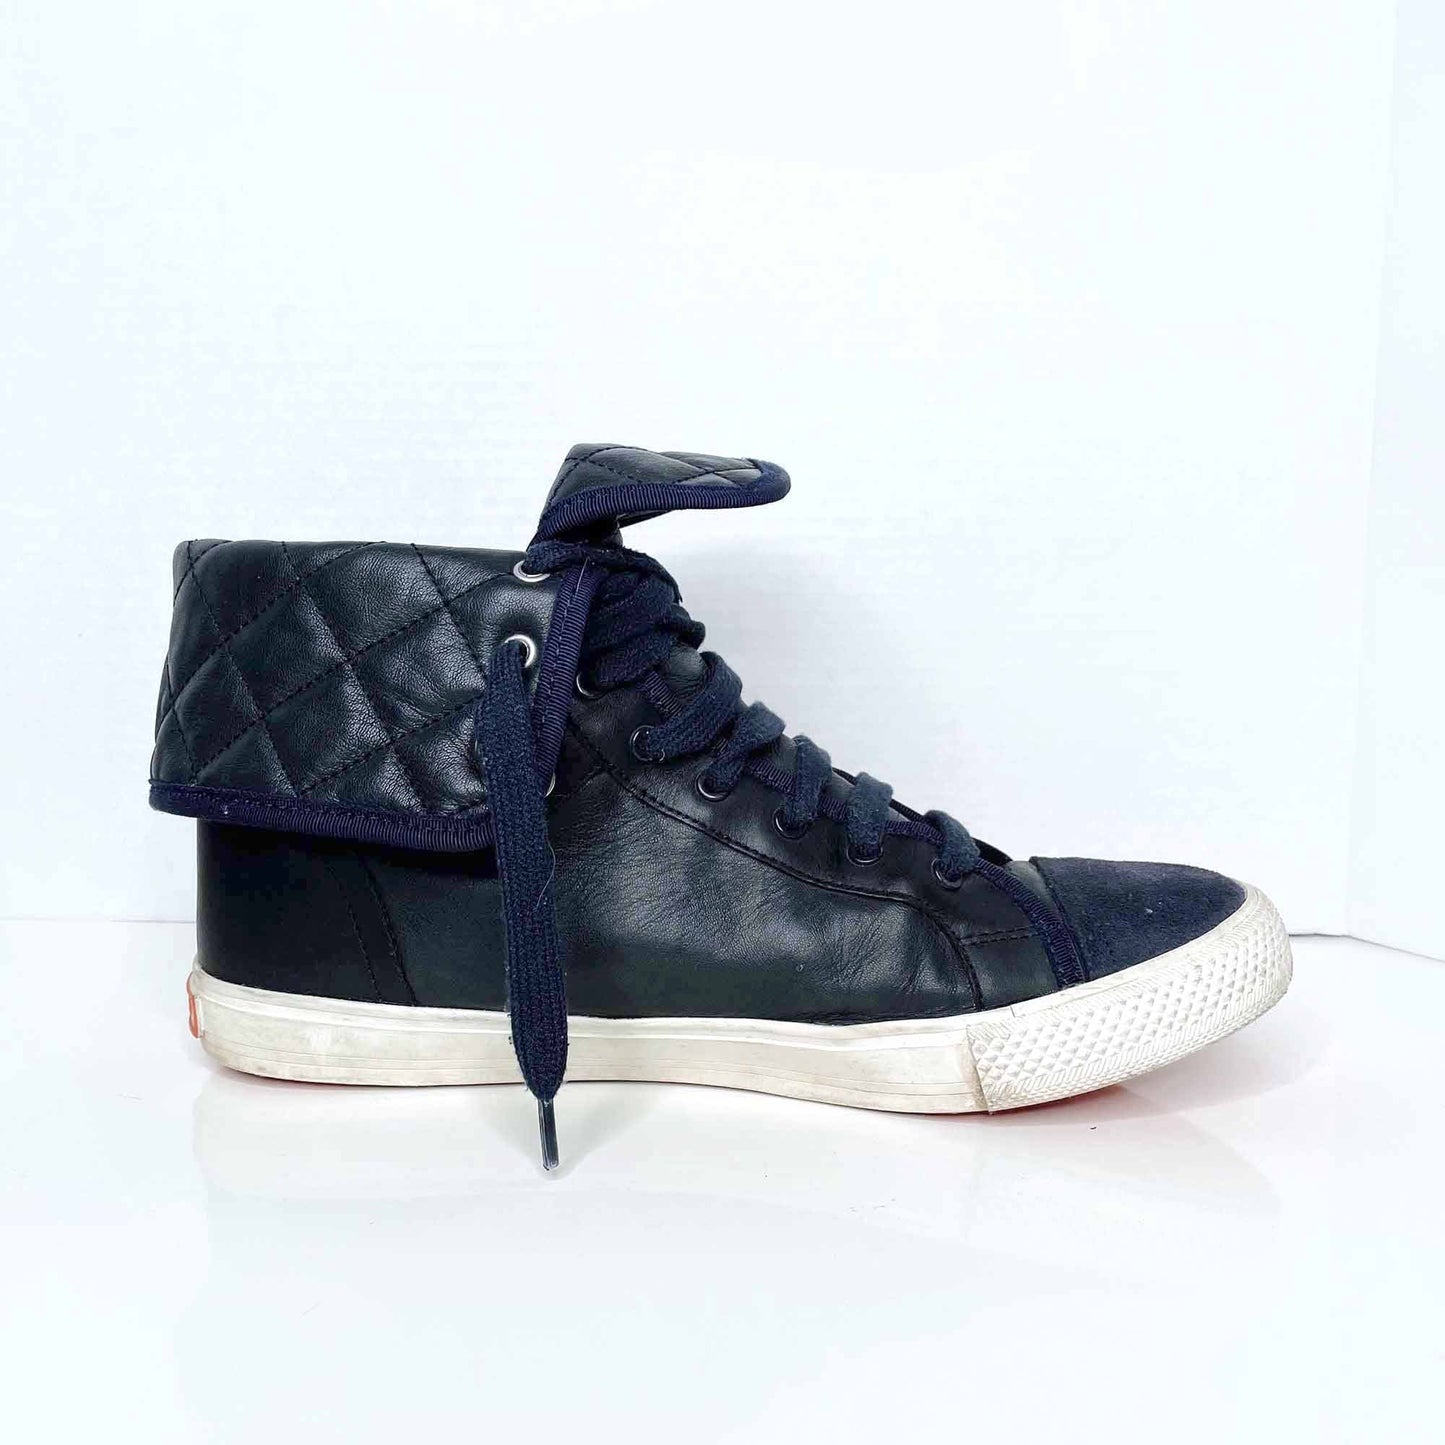 tory burch high top fold over leather sneakers - size 10